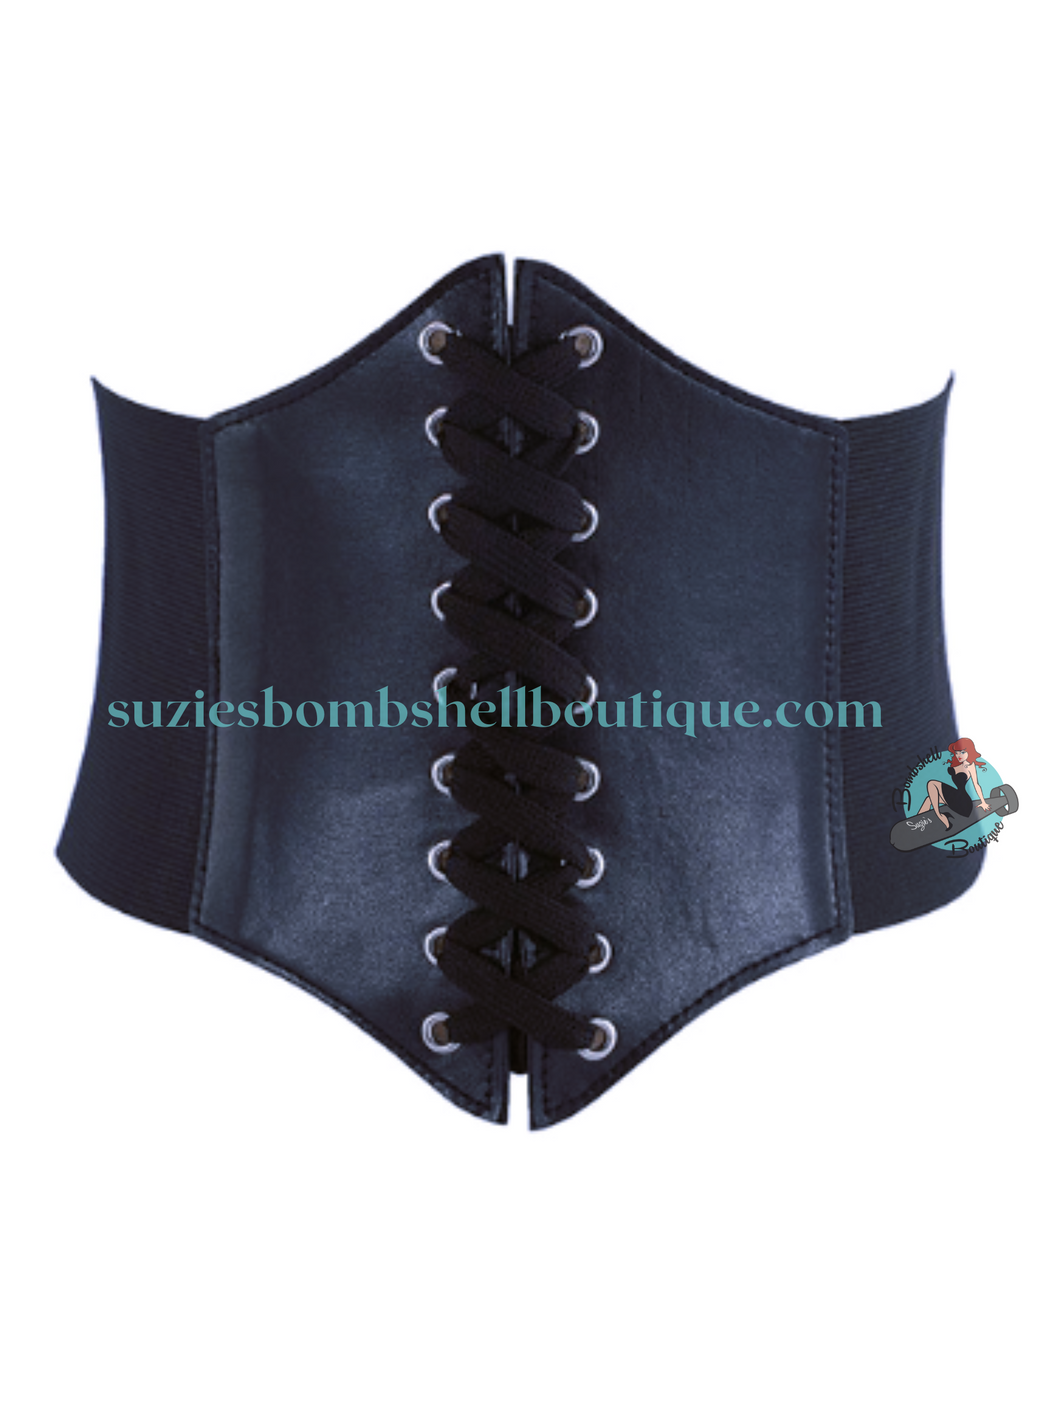 black elasticated waist cinching corset belt for women ladies gothic beltBombshell Helena Gothic Corset Belt goth pinup retro vintage spooky Canadian Pin-Up Shop Suzie's Bombshell Boutique